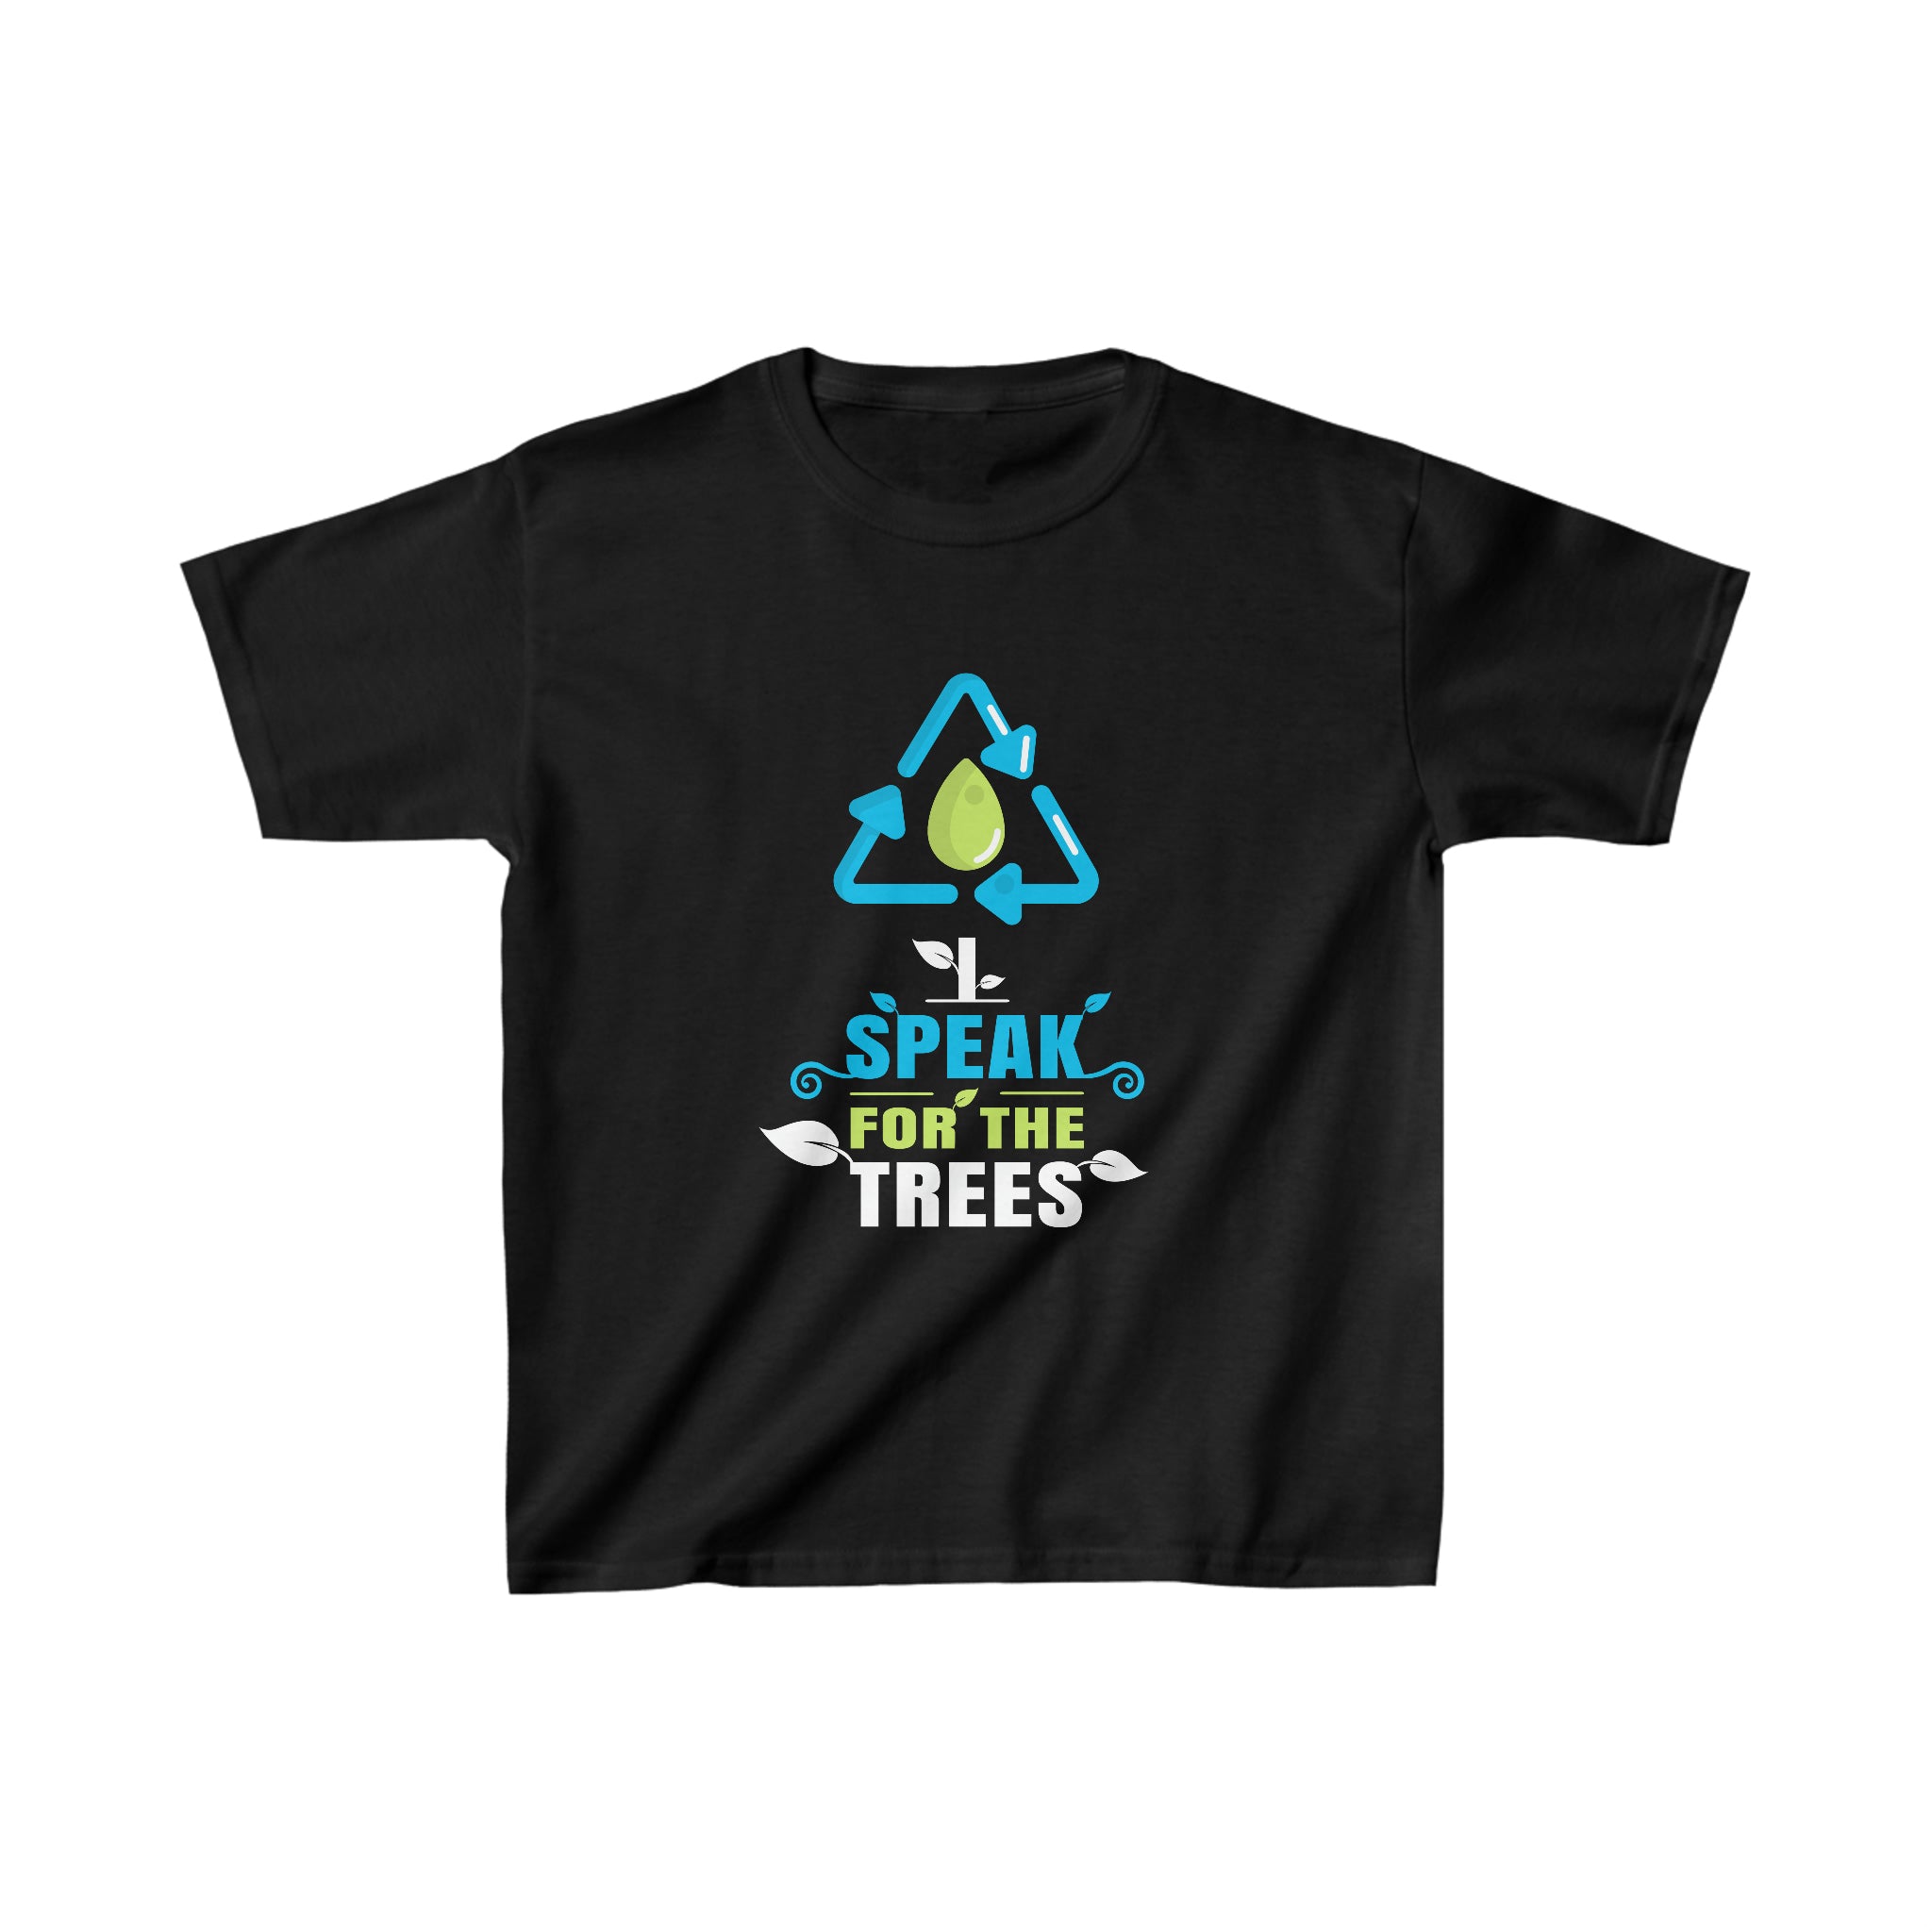 Nature Shirt I Speak For The Trees Save the Planet Boys Shirts